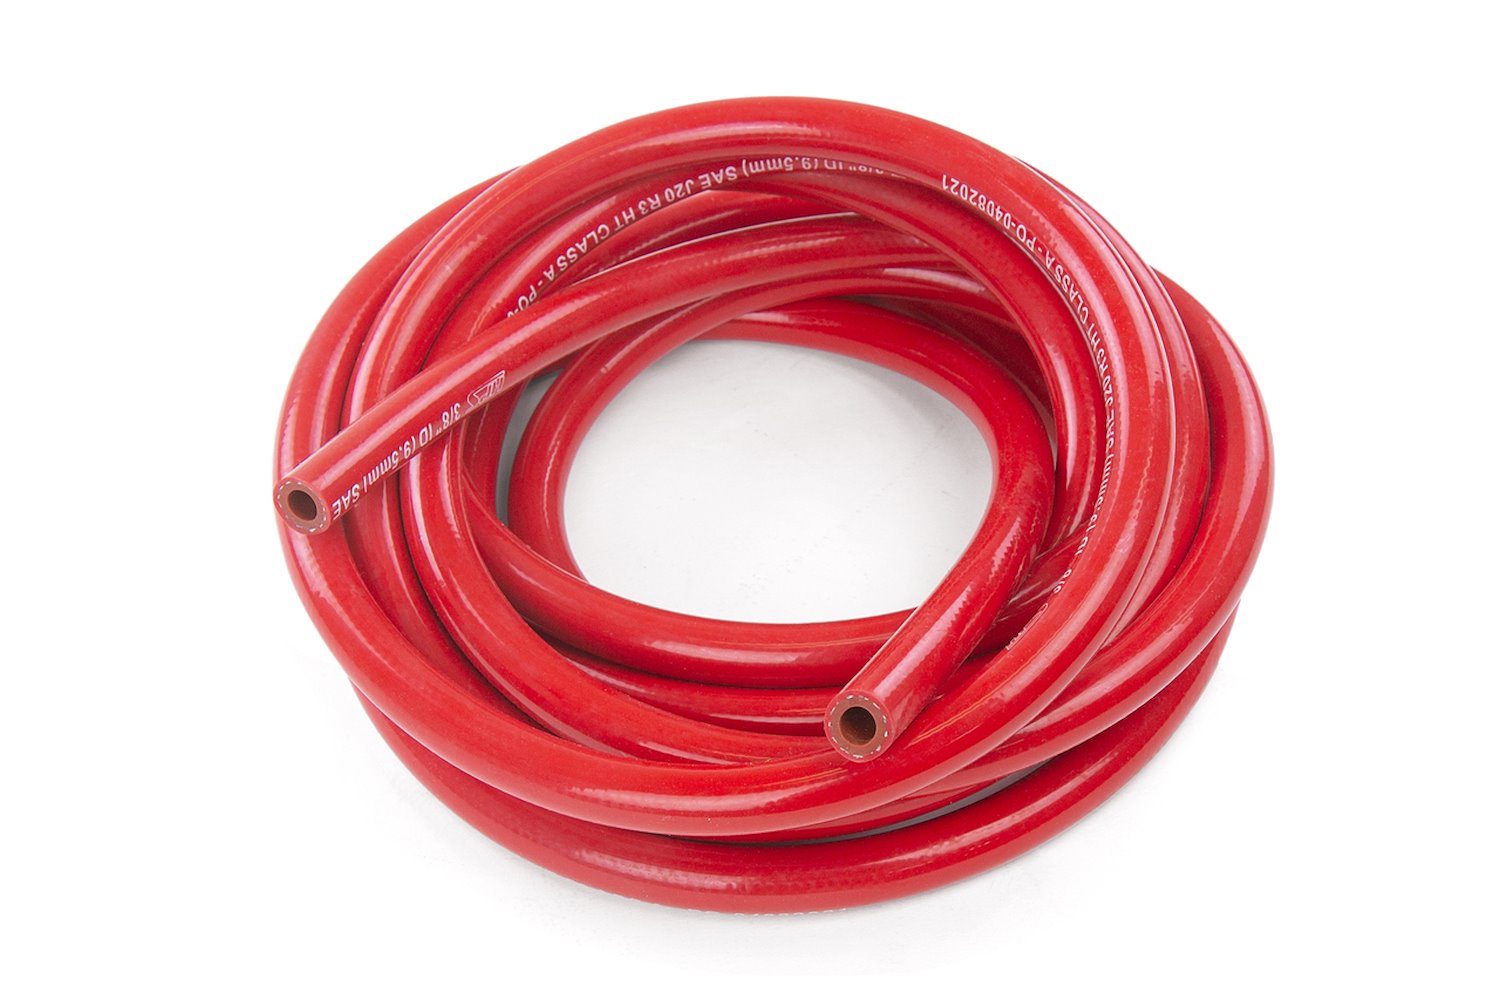 HTHH-032-REDx25 Silicone Heater Hose Tubing, High-Temp 1-Ply Reinforced, 5/16 in. ID, 25 ft. Roll, Red